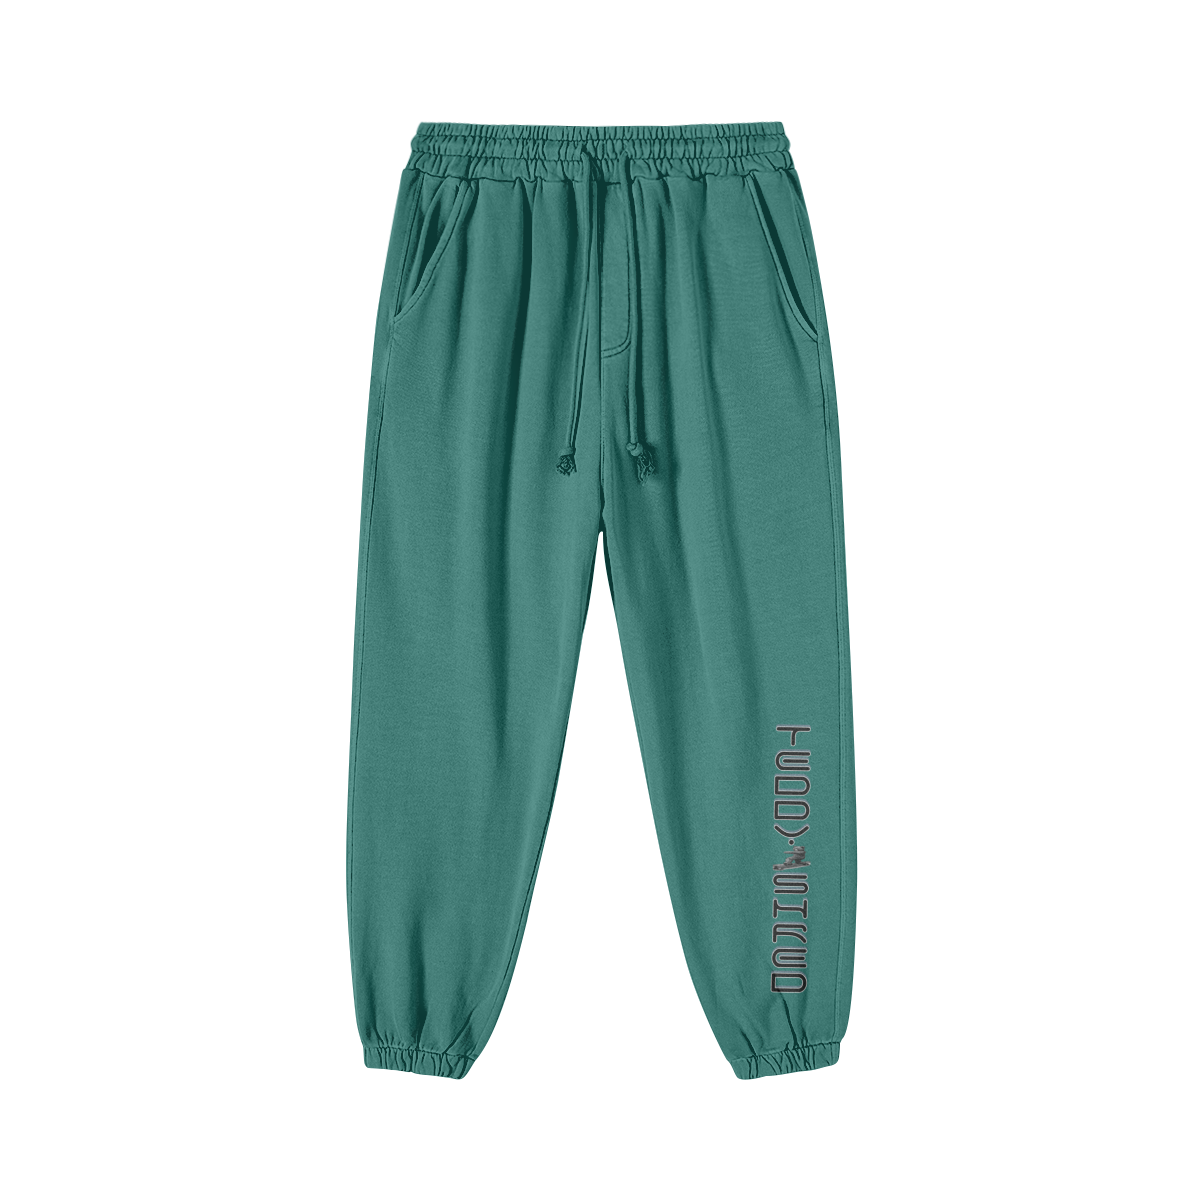 Wintergreen Dream - Teddy Ride Shred 420GSM Unisex Super Heavyweight Washed Baggy Sweatpants - unisex sweatpants at TFC&H Co.